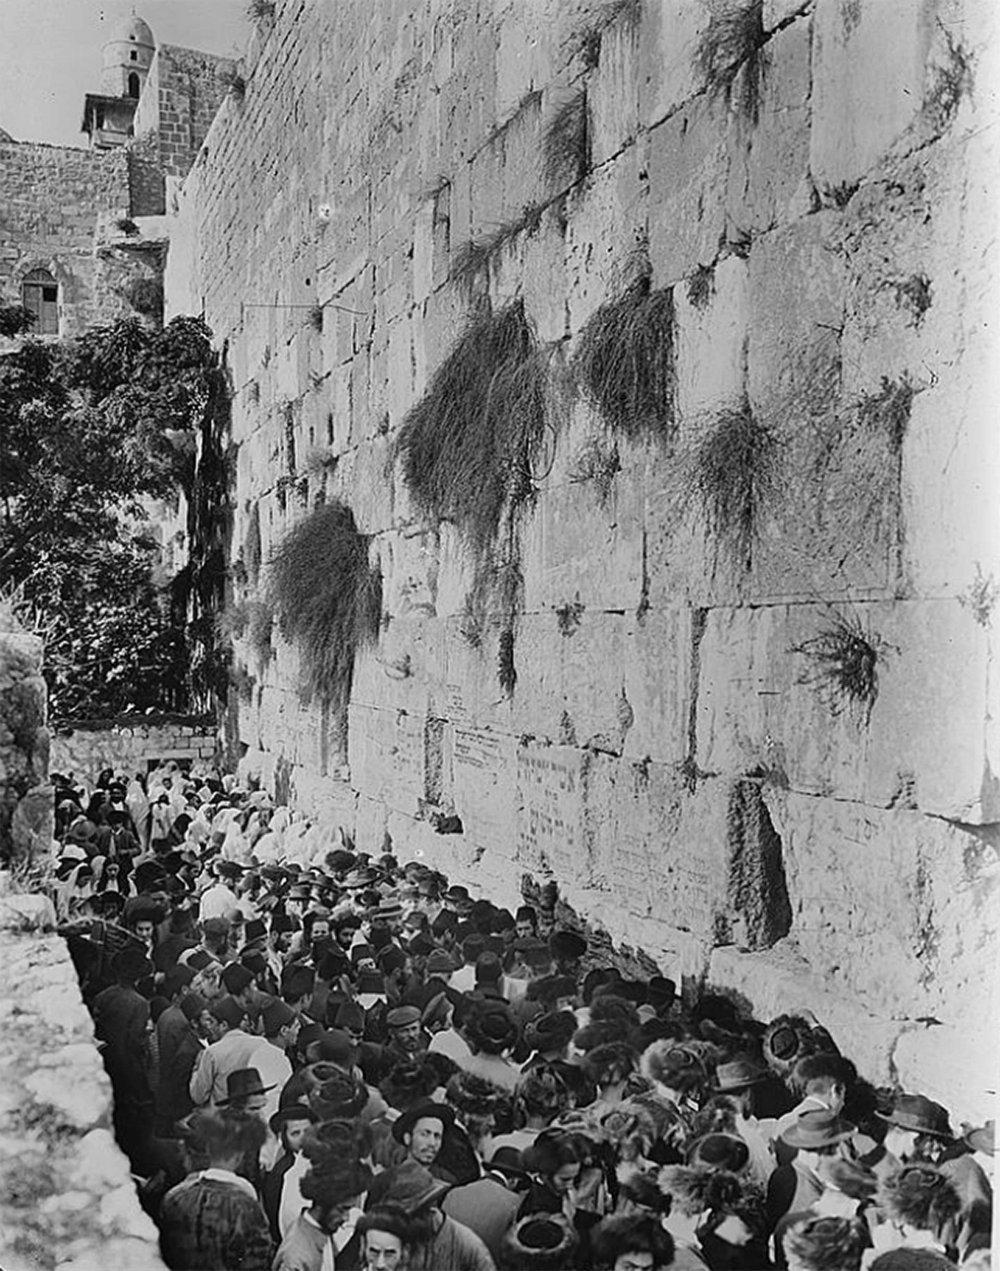 Jewish worshippers crowded in the narrow space between the Western (al-Buraq) Wall and the edge of the Moroccan Quarter, 1920